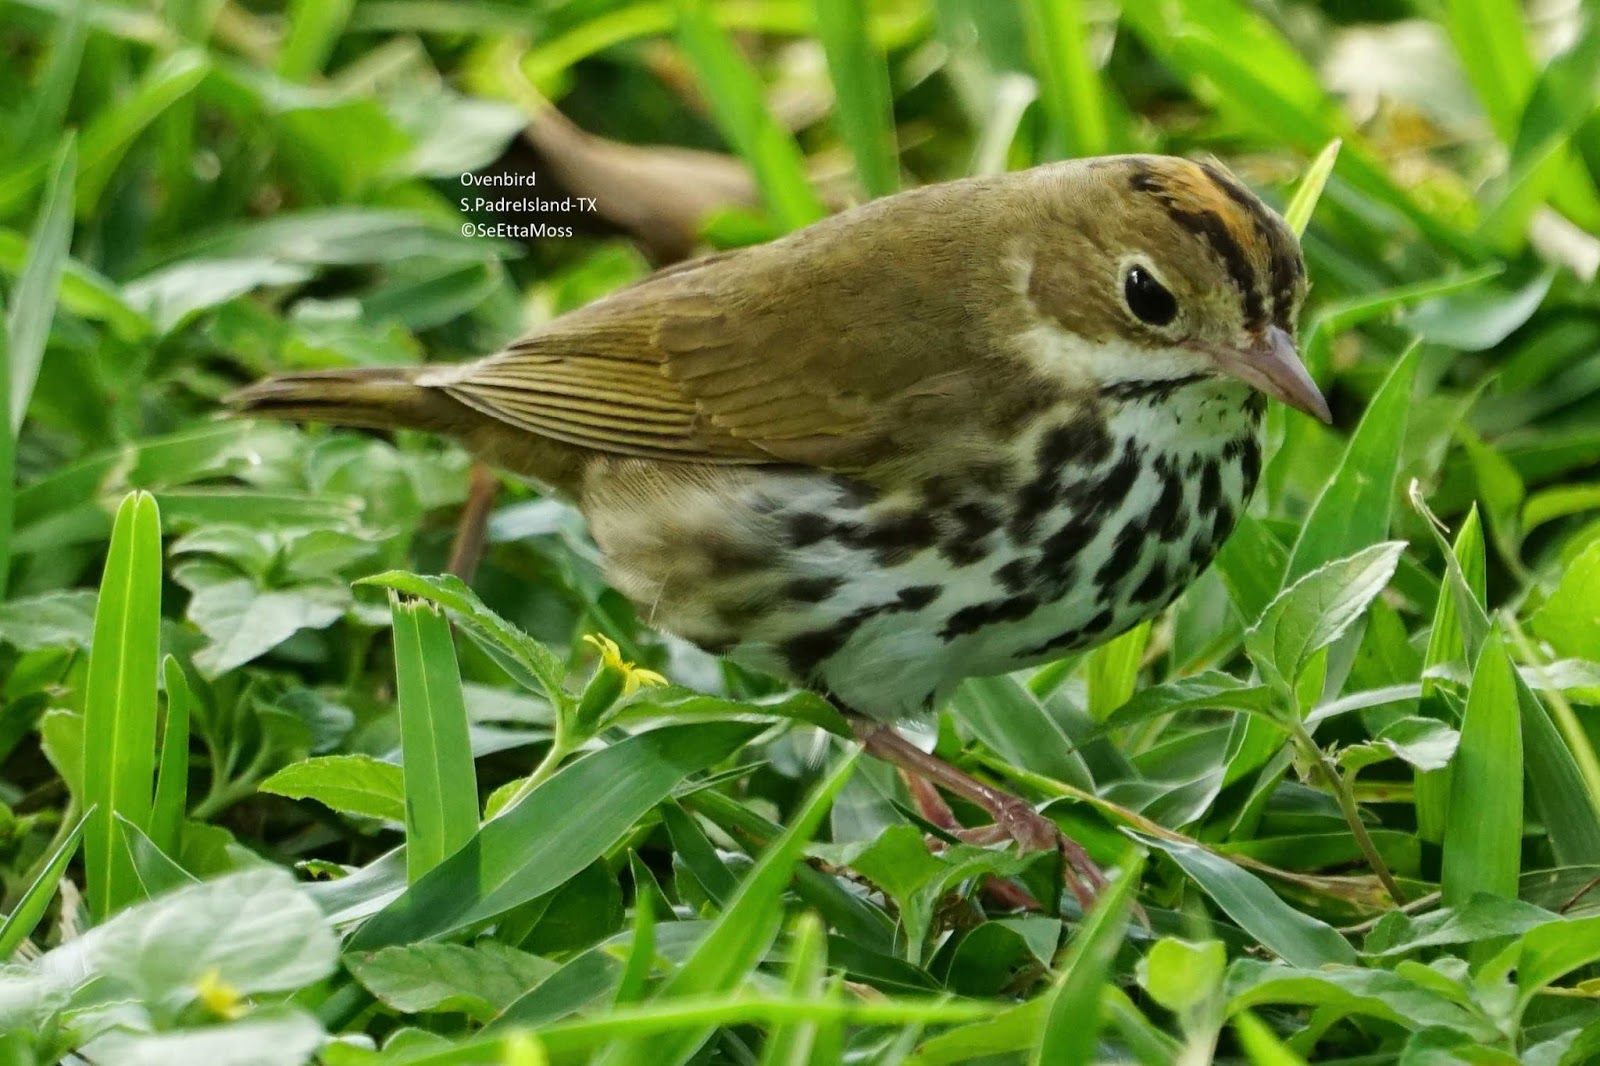 Ovenbird-up close and personal